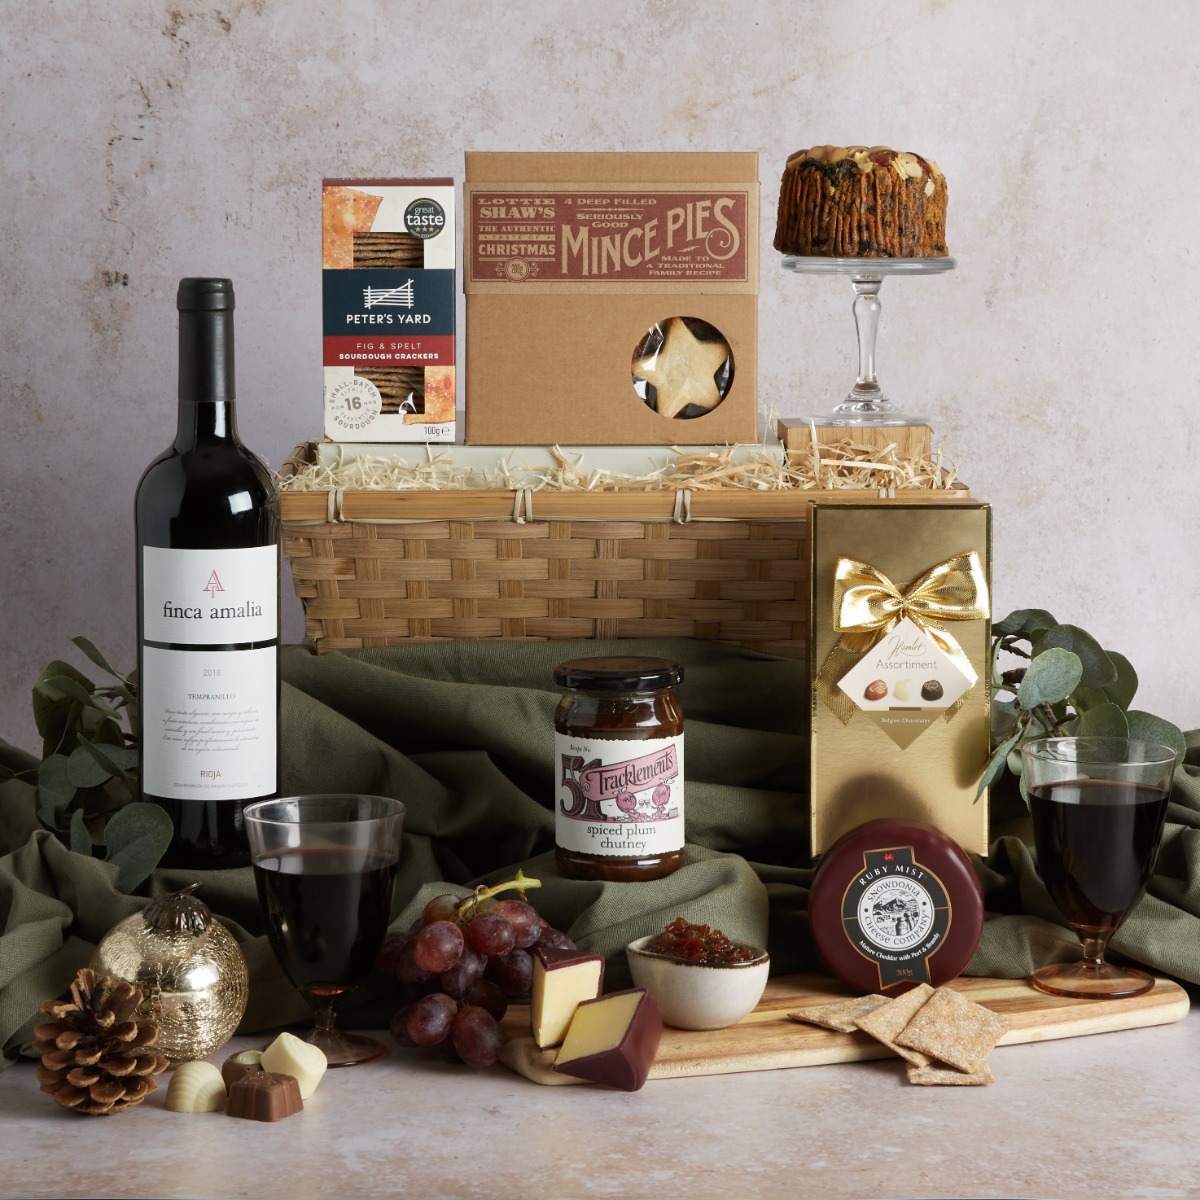 The Classic Christmas Hamper with contents on display